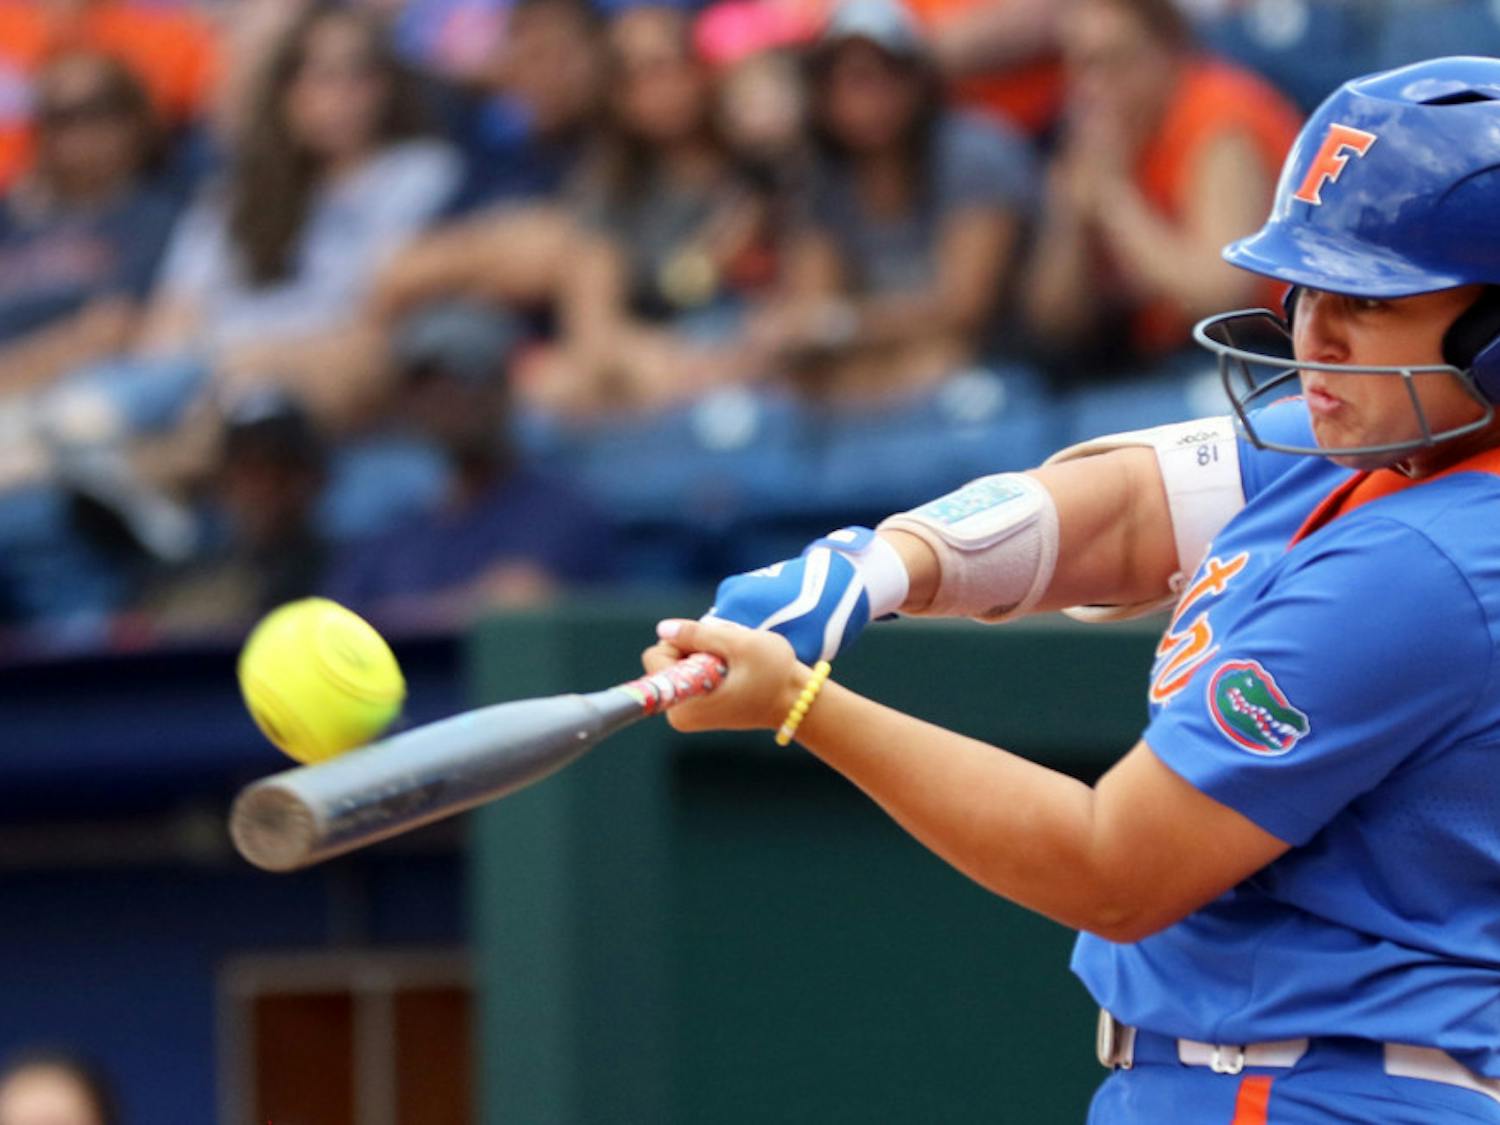 UF first baseman Amanda Lorenz went 1 for 3 with two RBIs in the Gators 15-0 win over Bethune-Cookman.